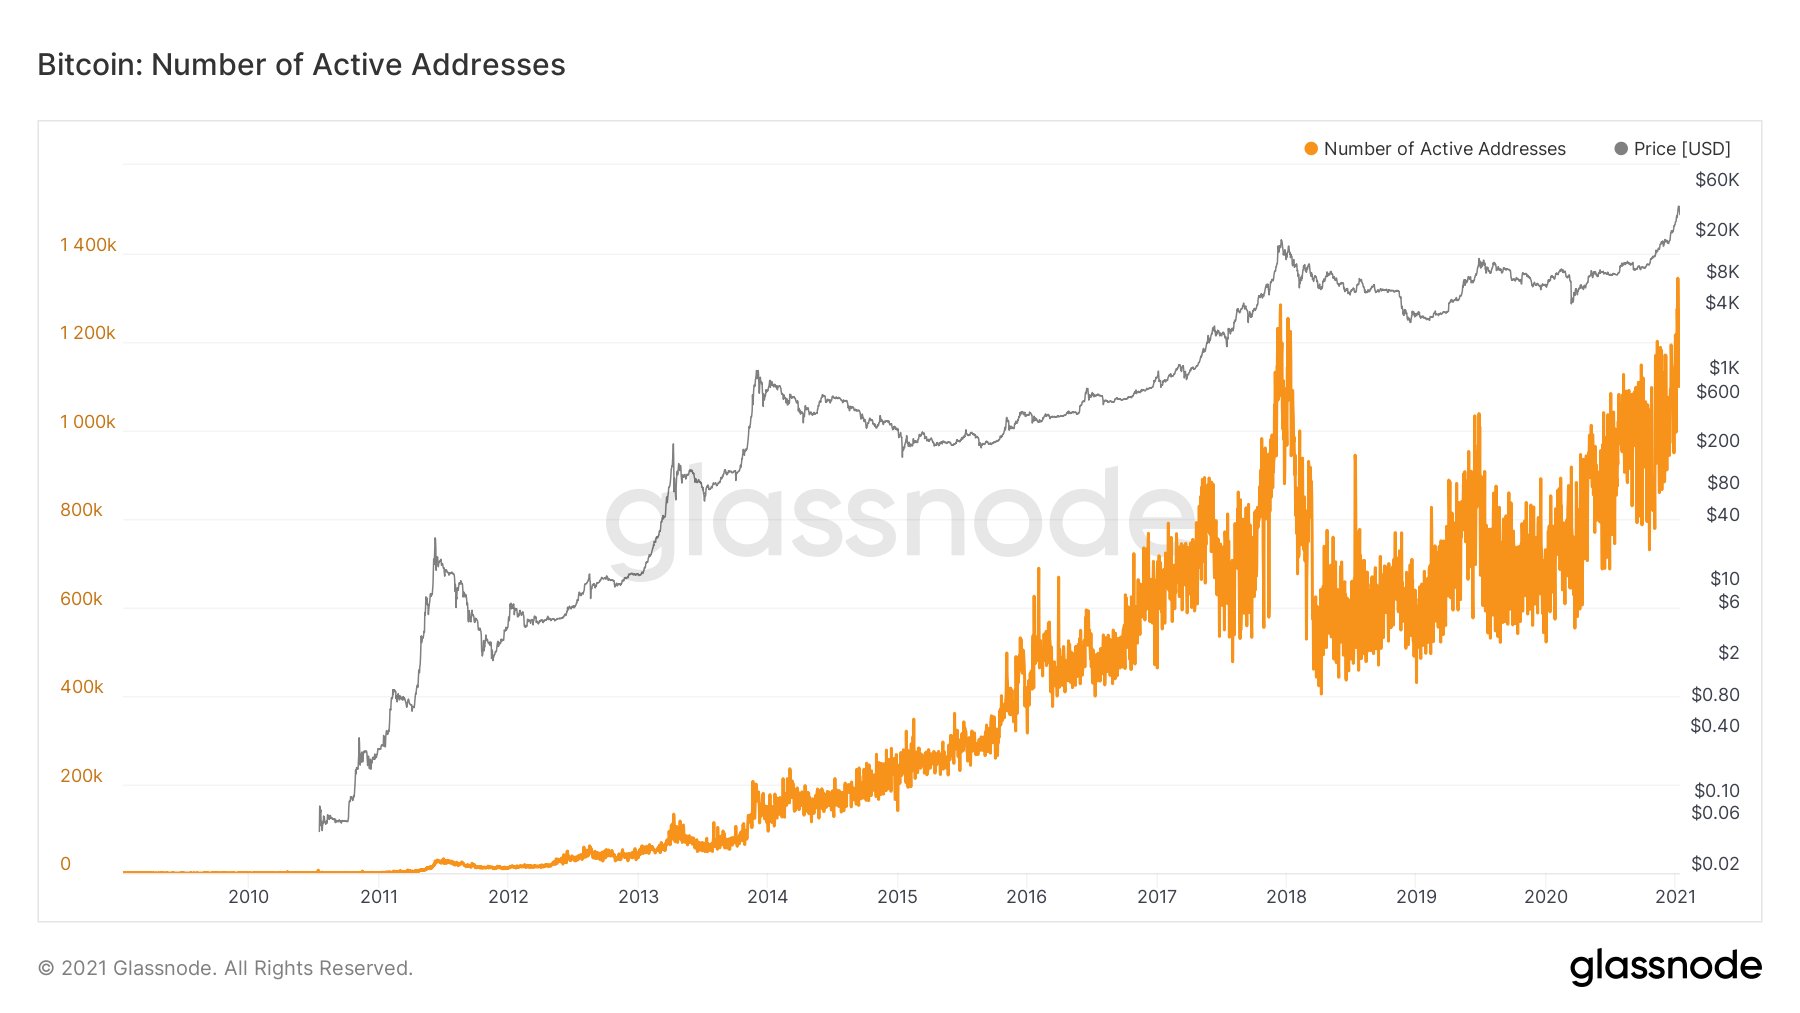 Bitcoin prics against number of active addresses